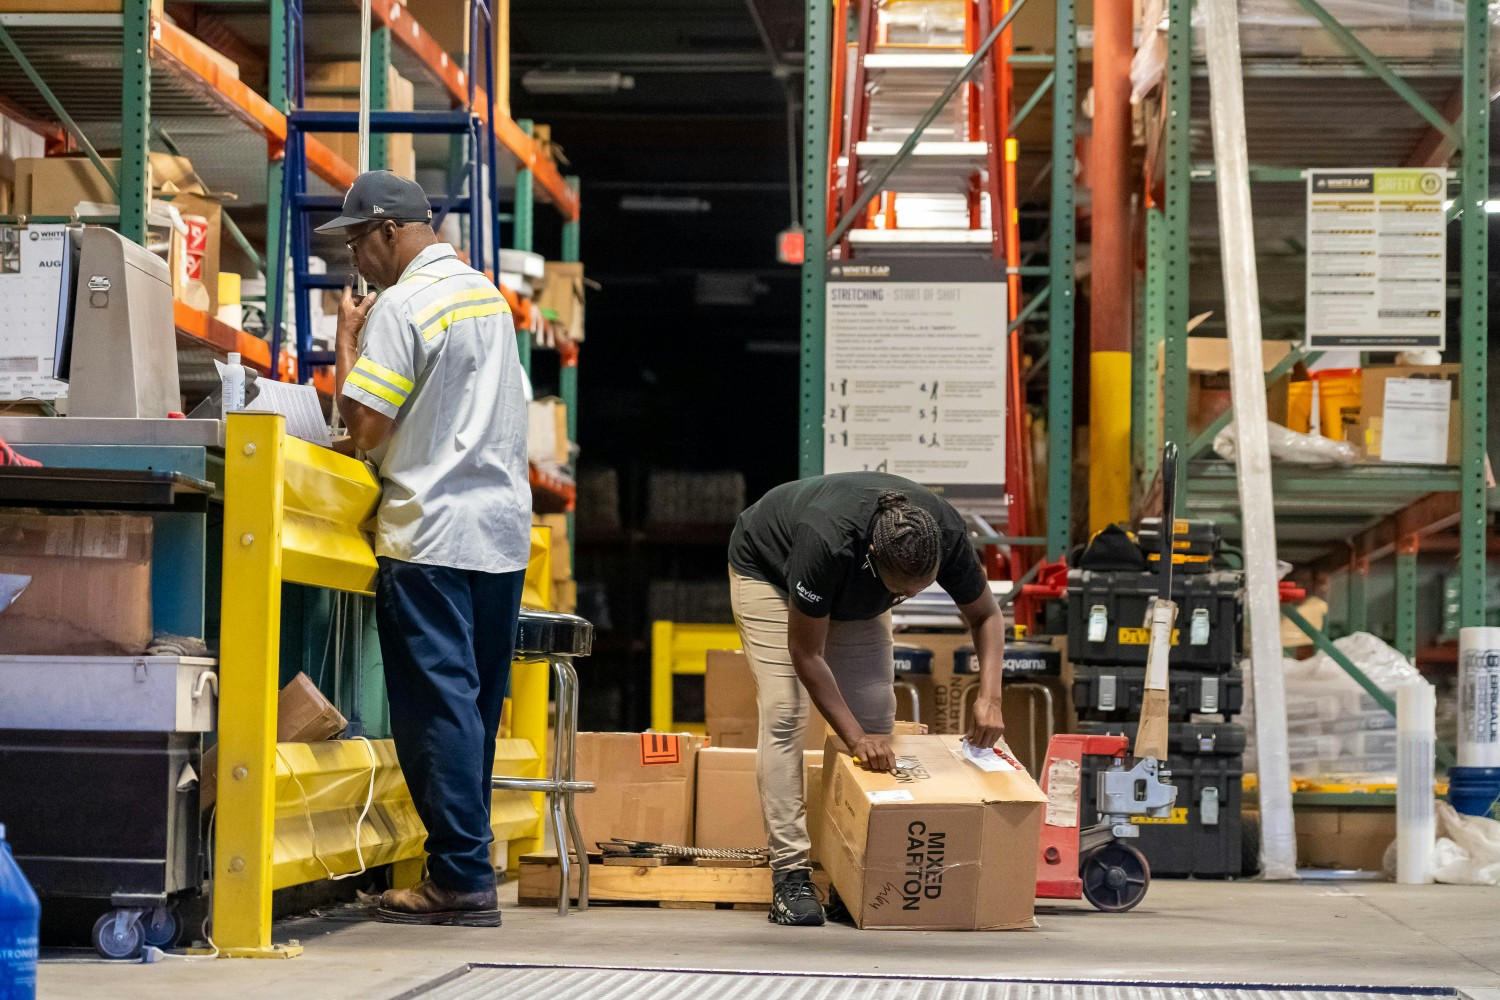 Our team works together in warehouses to ensure customers have everything they need when and where they need it. 